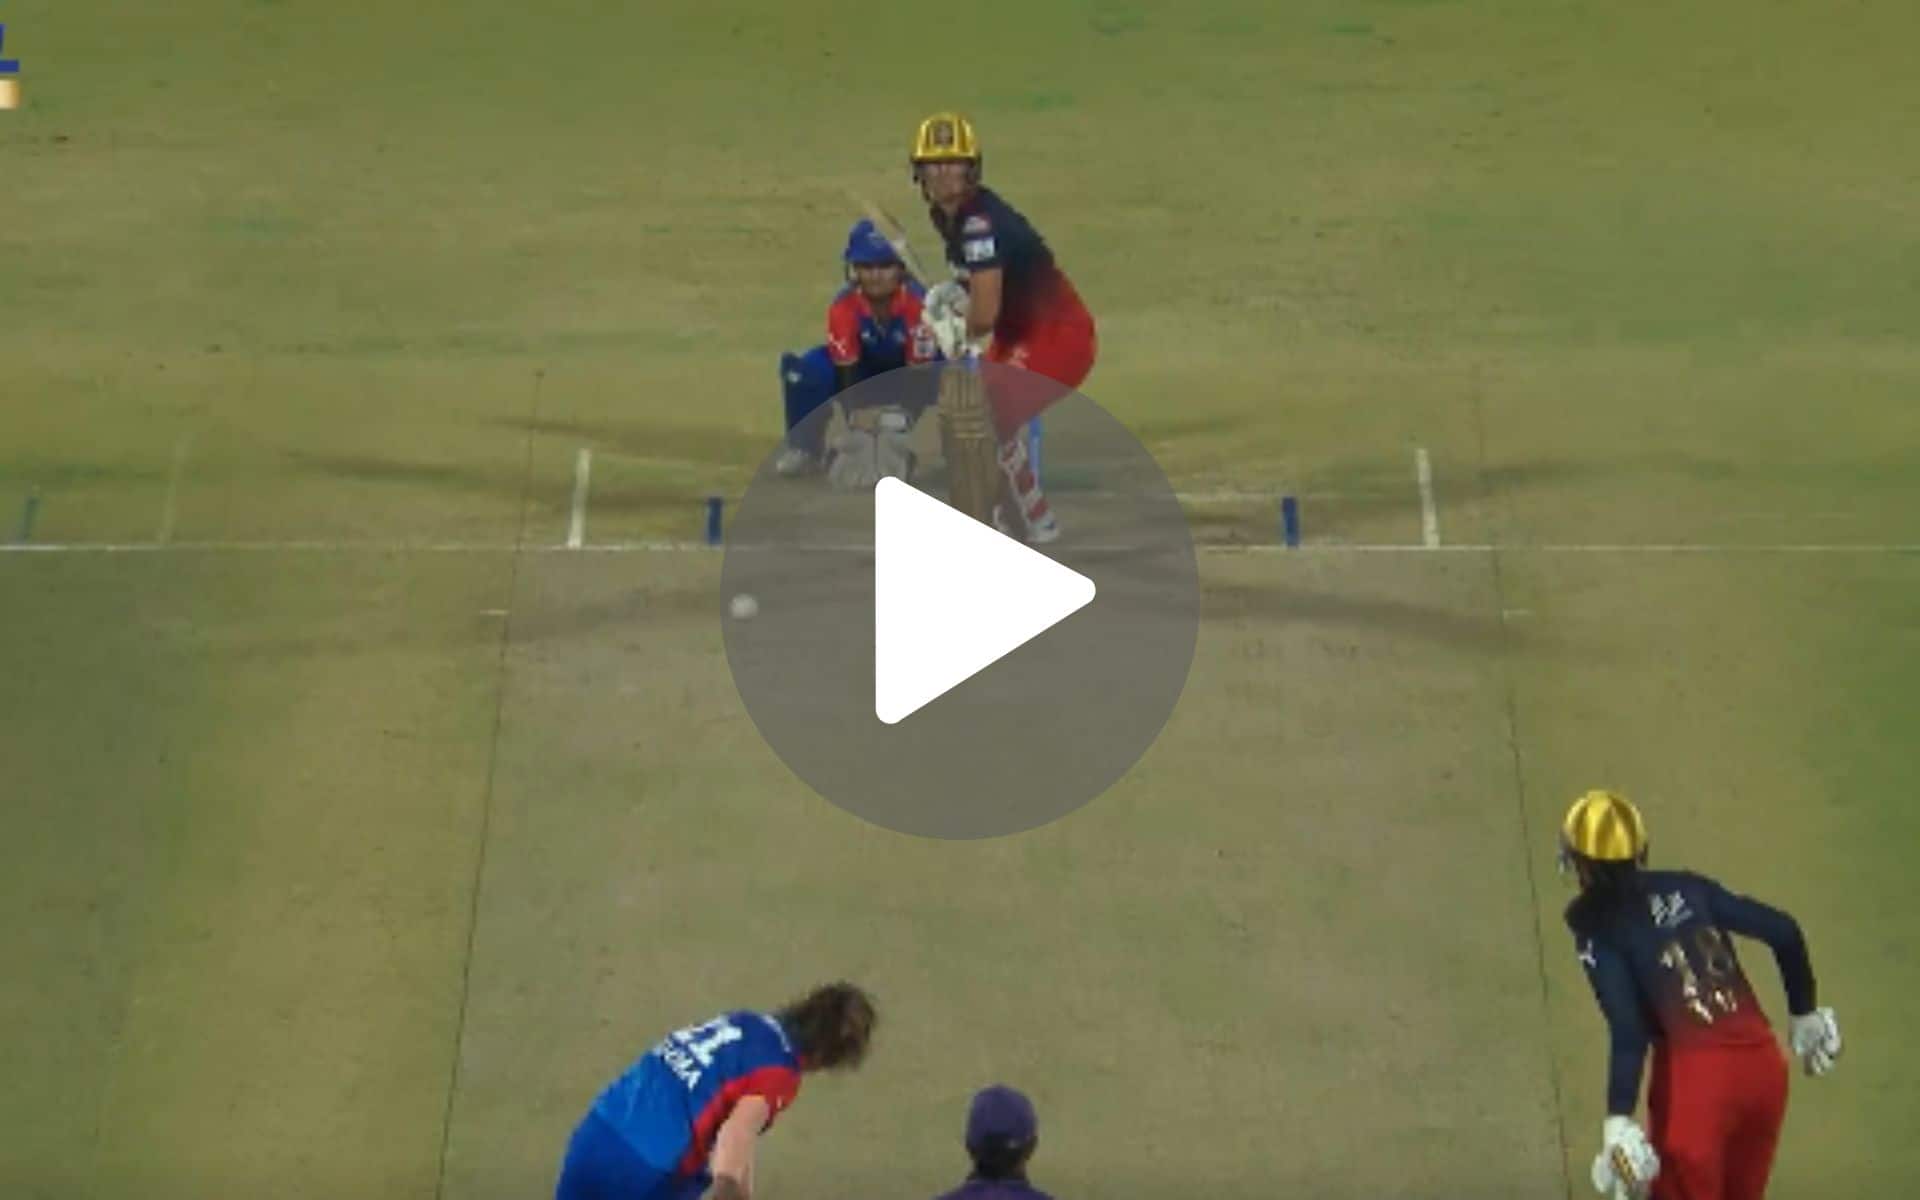 [Watch] Sophie Devine Hammers Down 18 Runs To Radha Yadav With A Monsterous Six